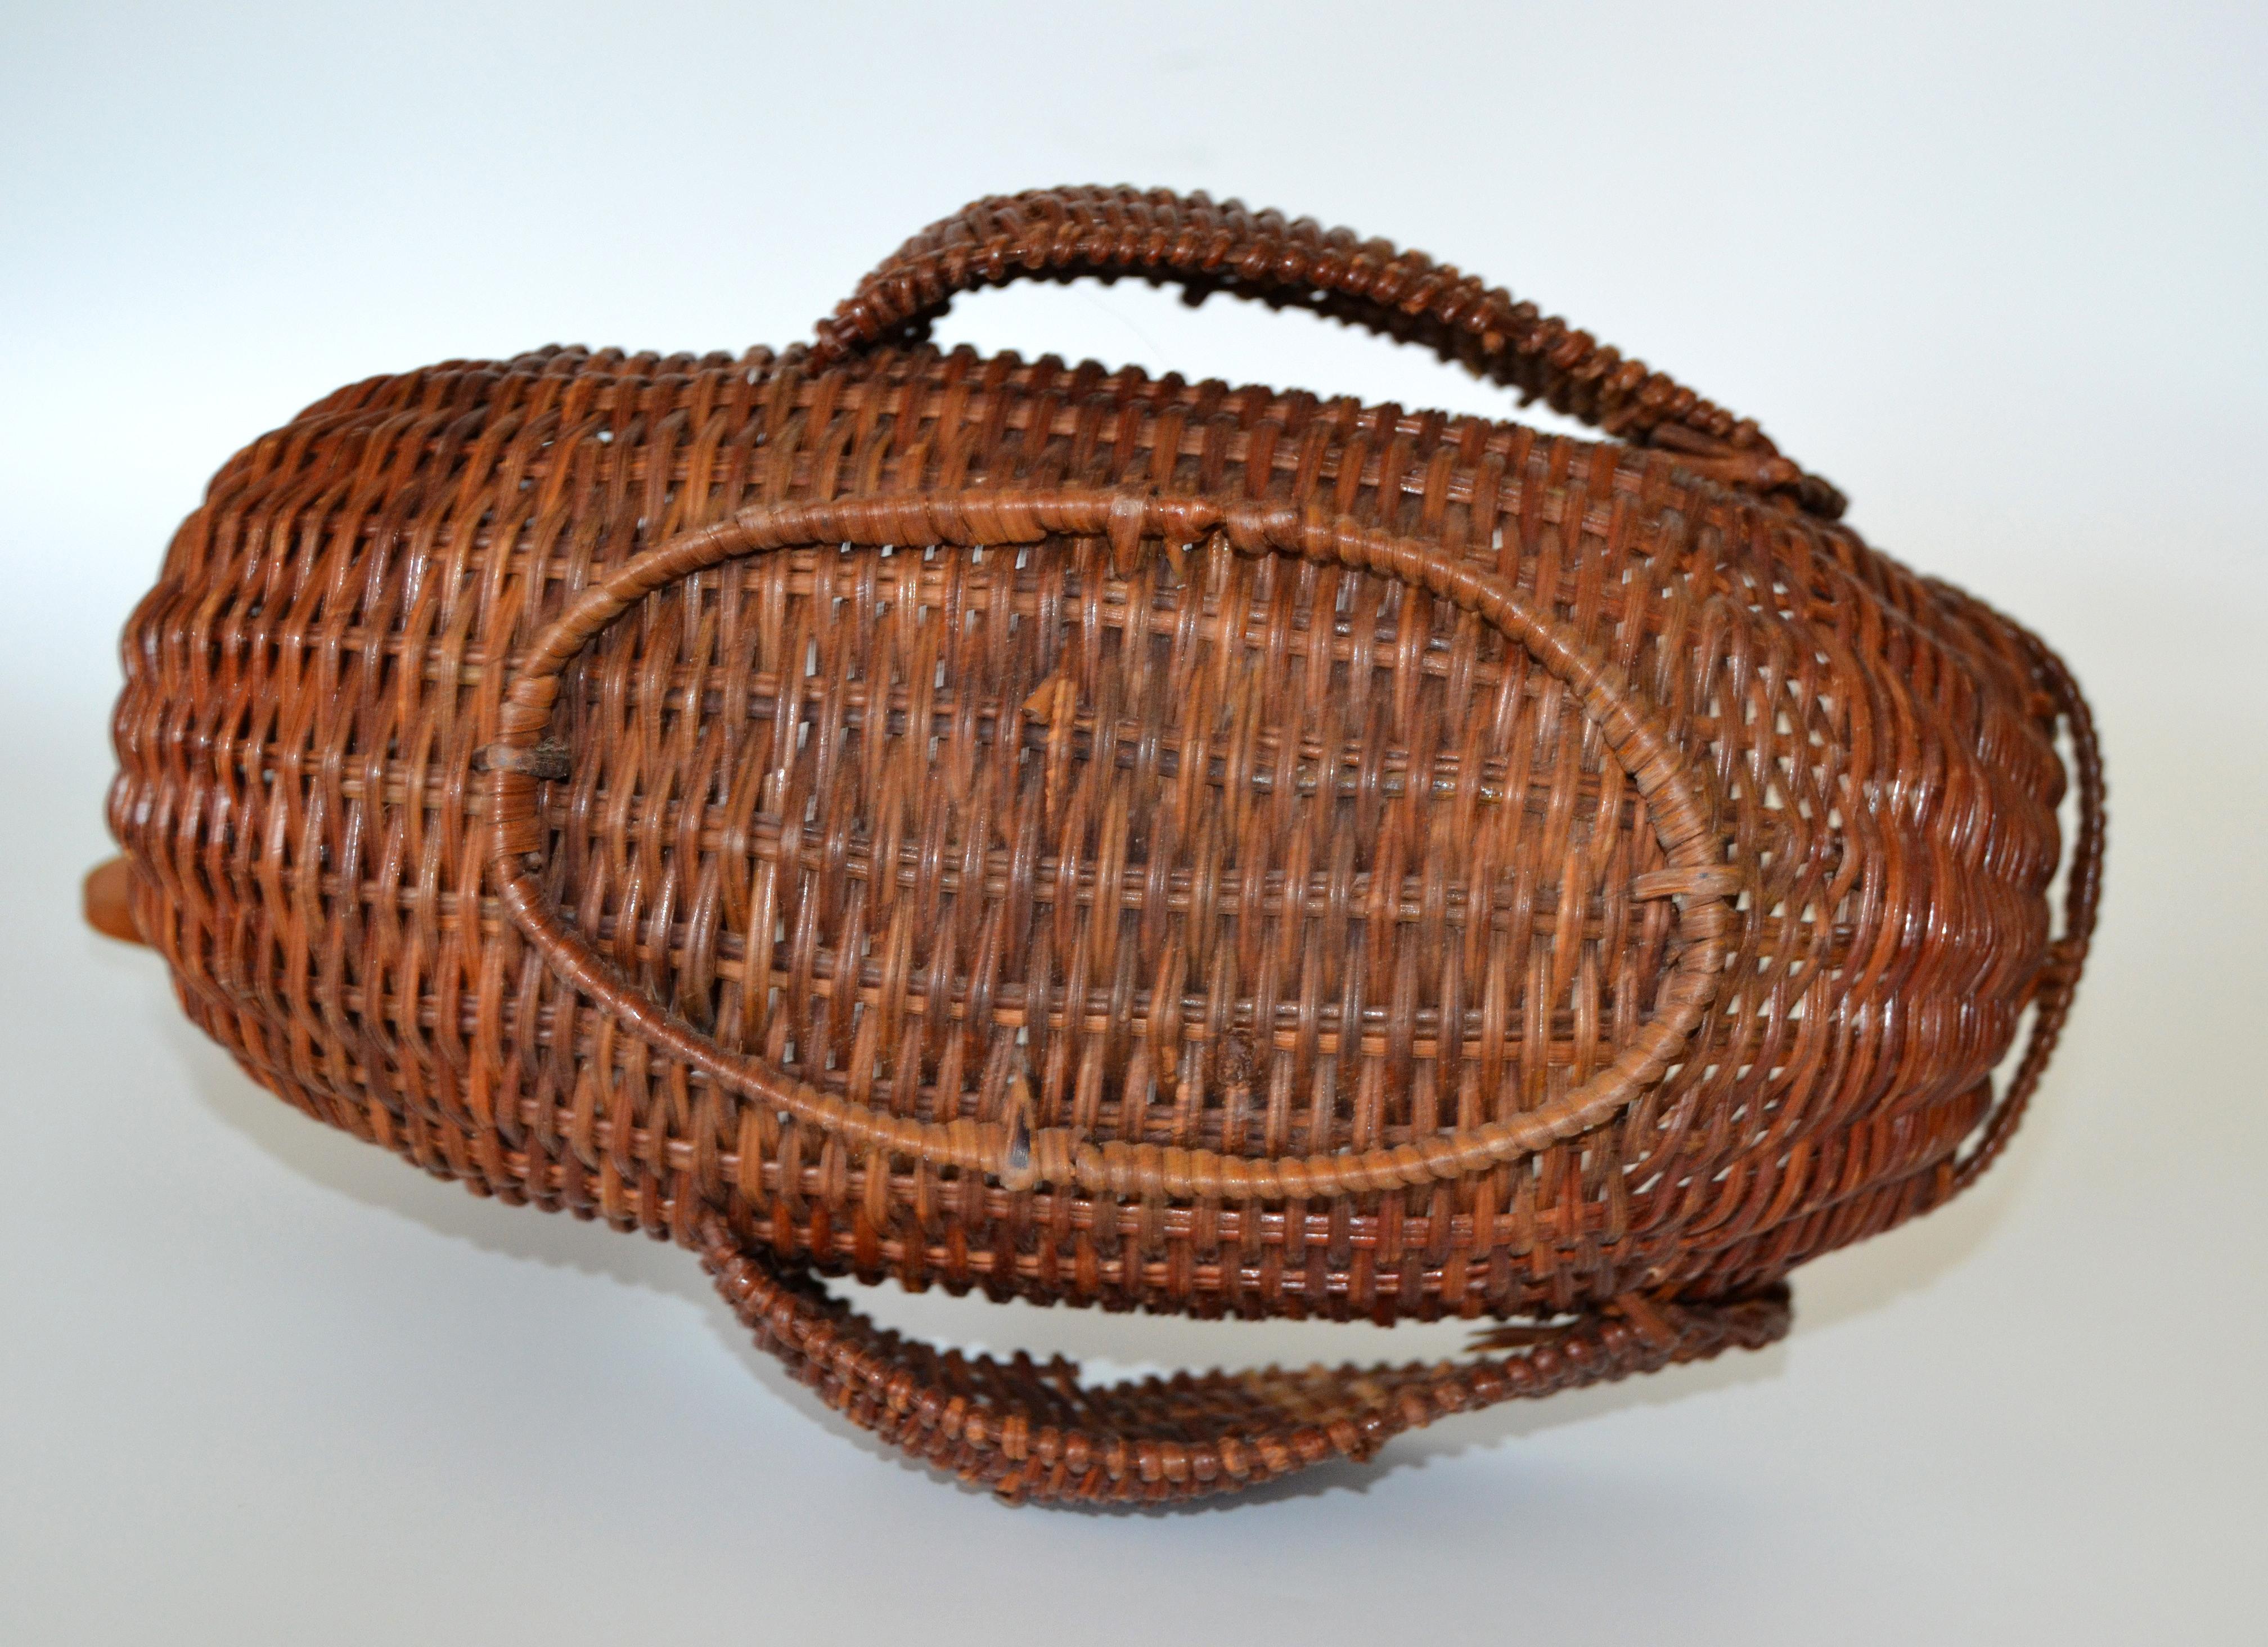 Boho Chic Decorative Handcrafted Woven Reed Brown Duck Basket, Animal Sculpture  5